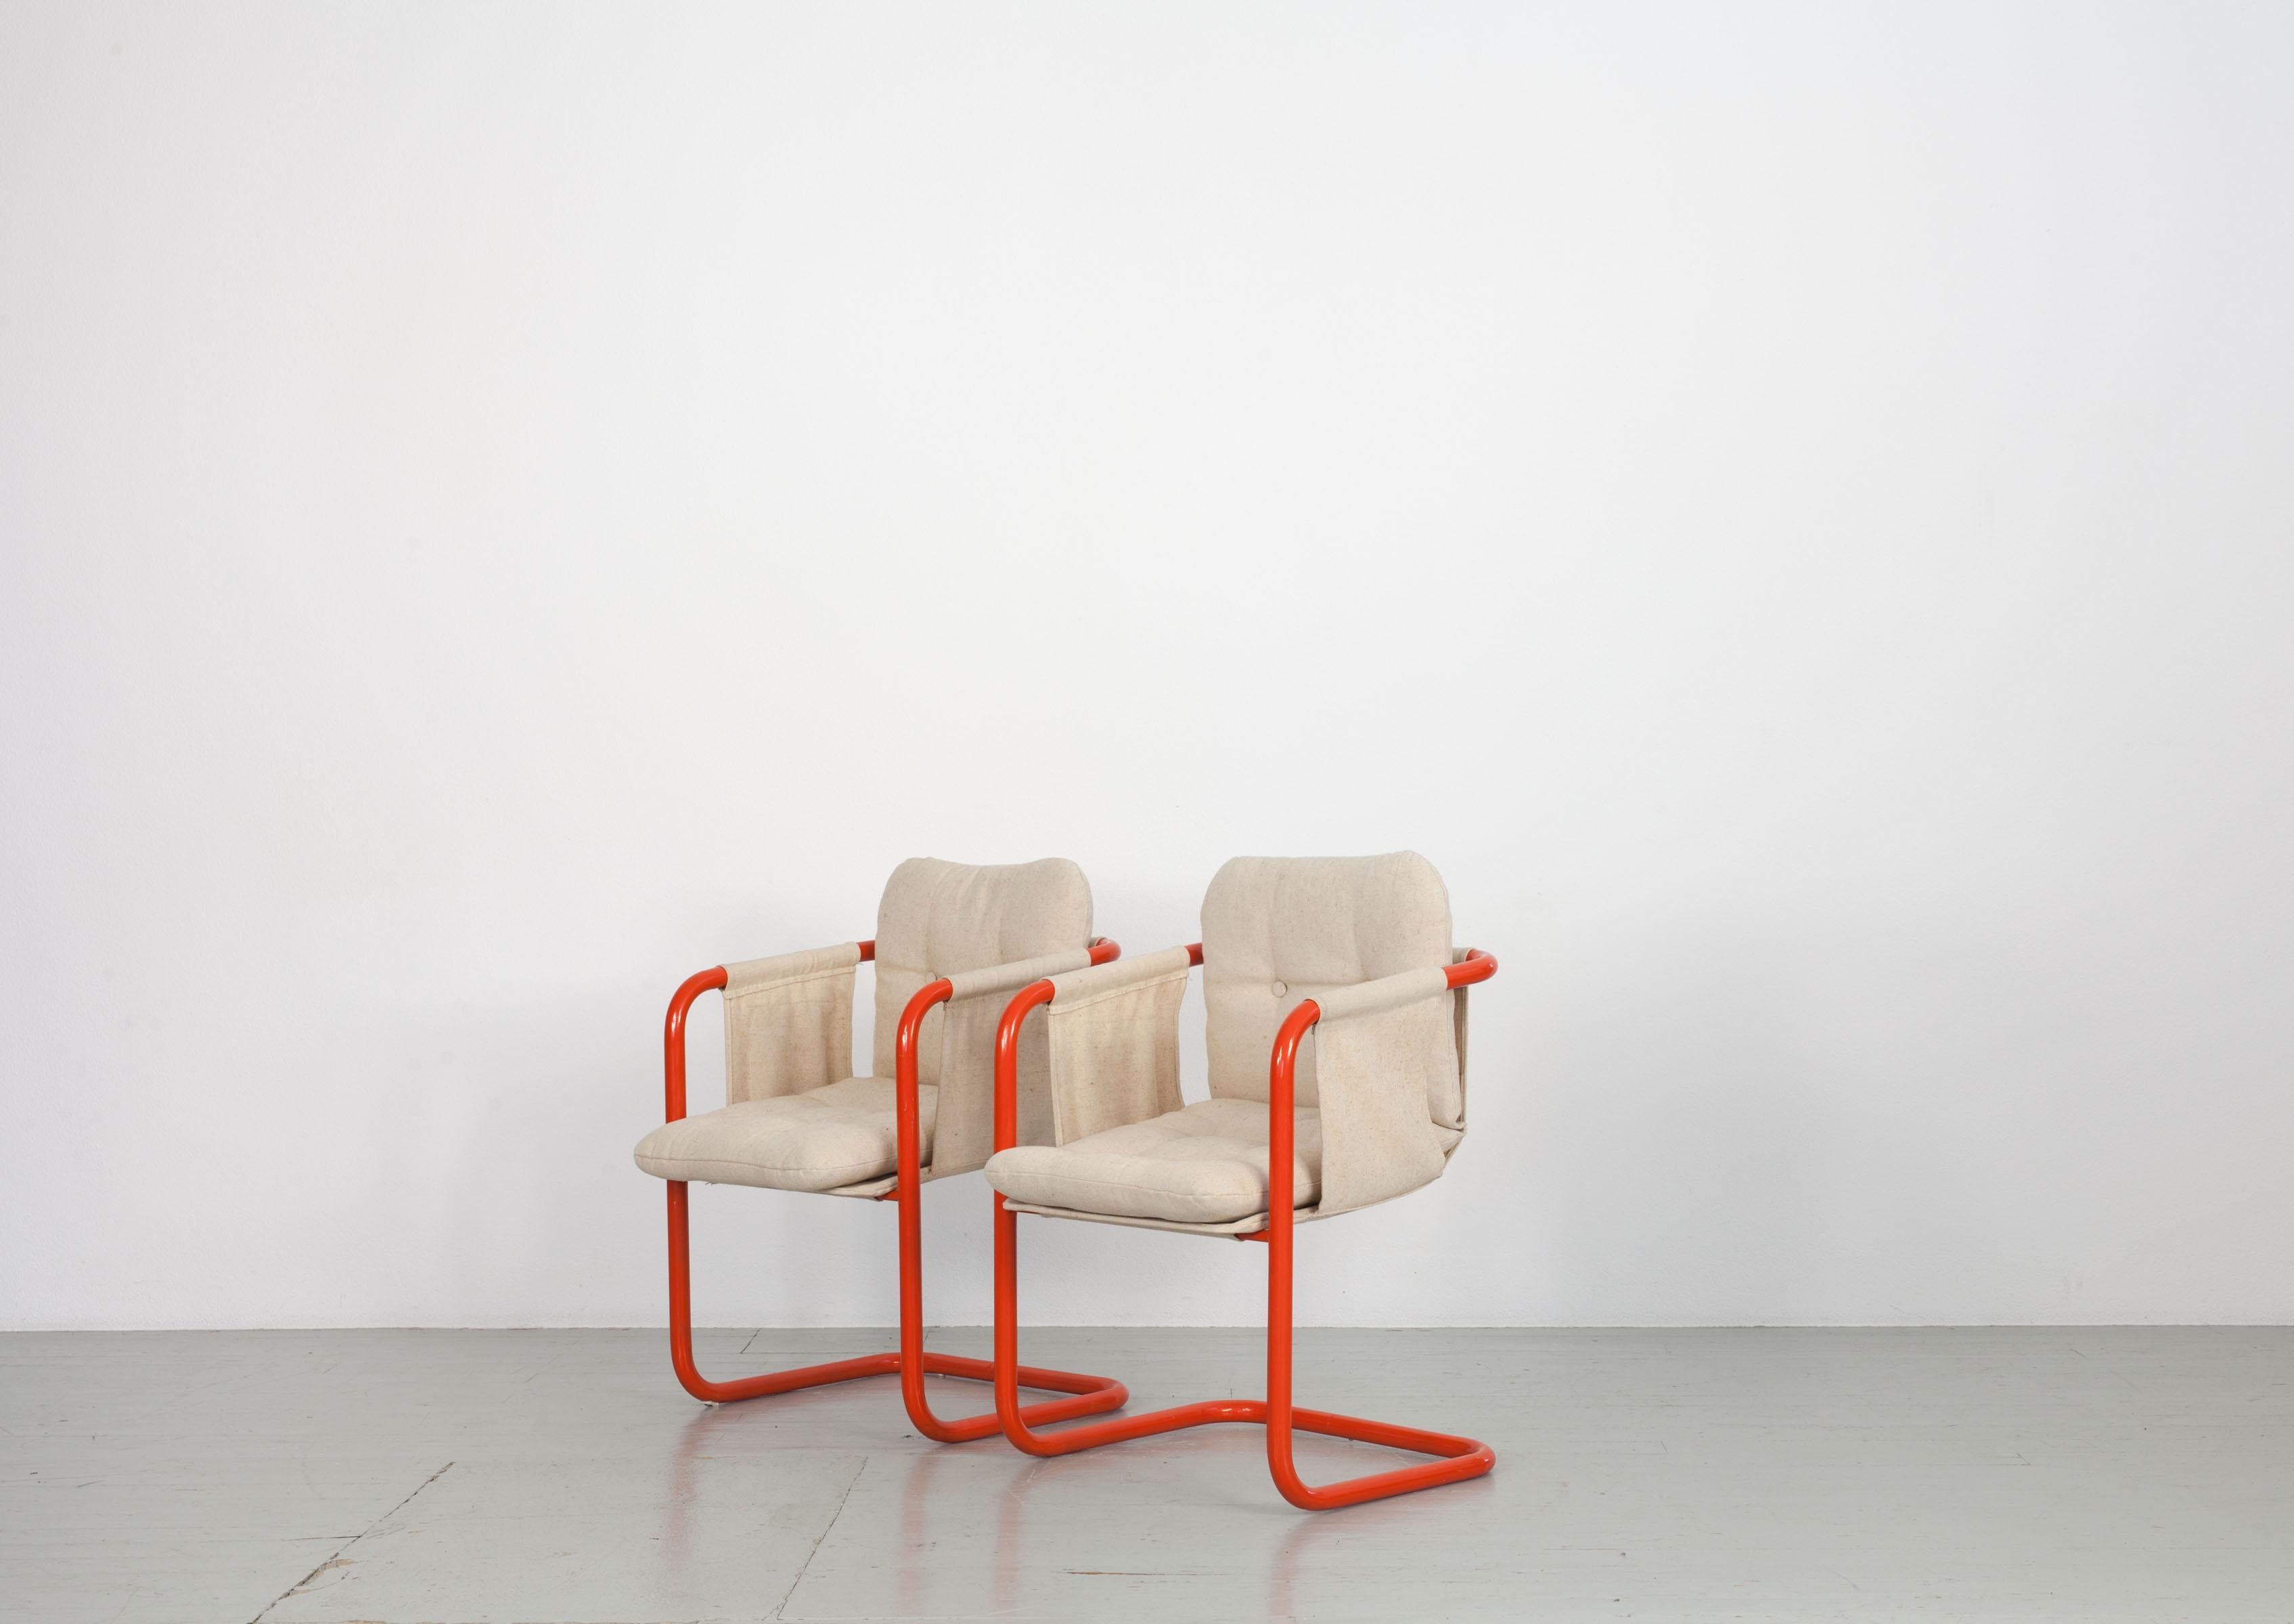 Italian 2 Cantilever Armchairs in the Manner of Gae Aulenti, Italy, 1970s For Sale